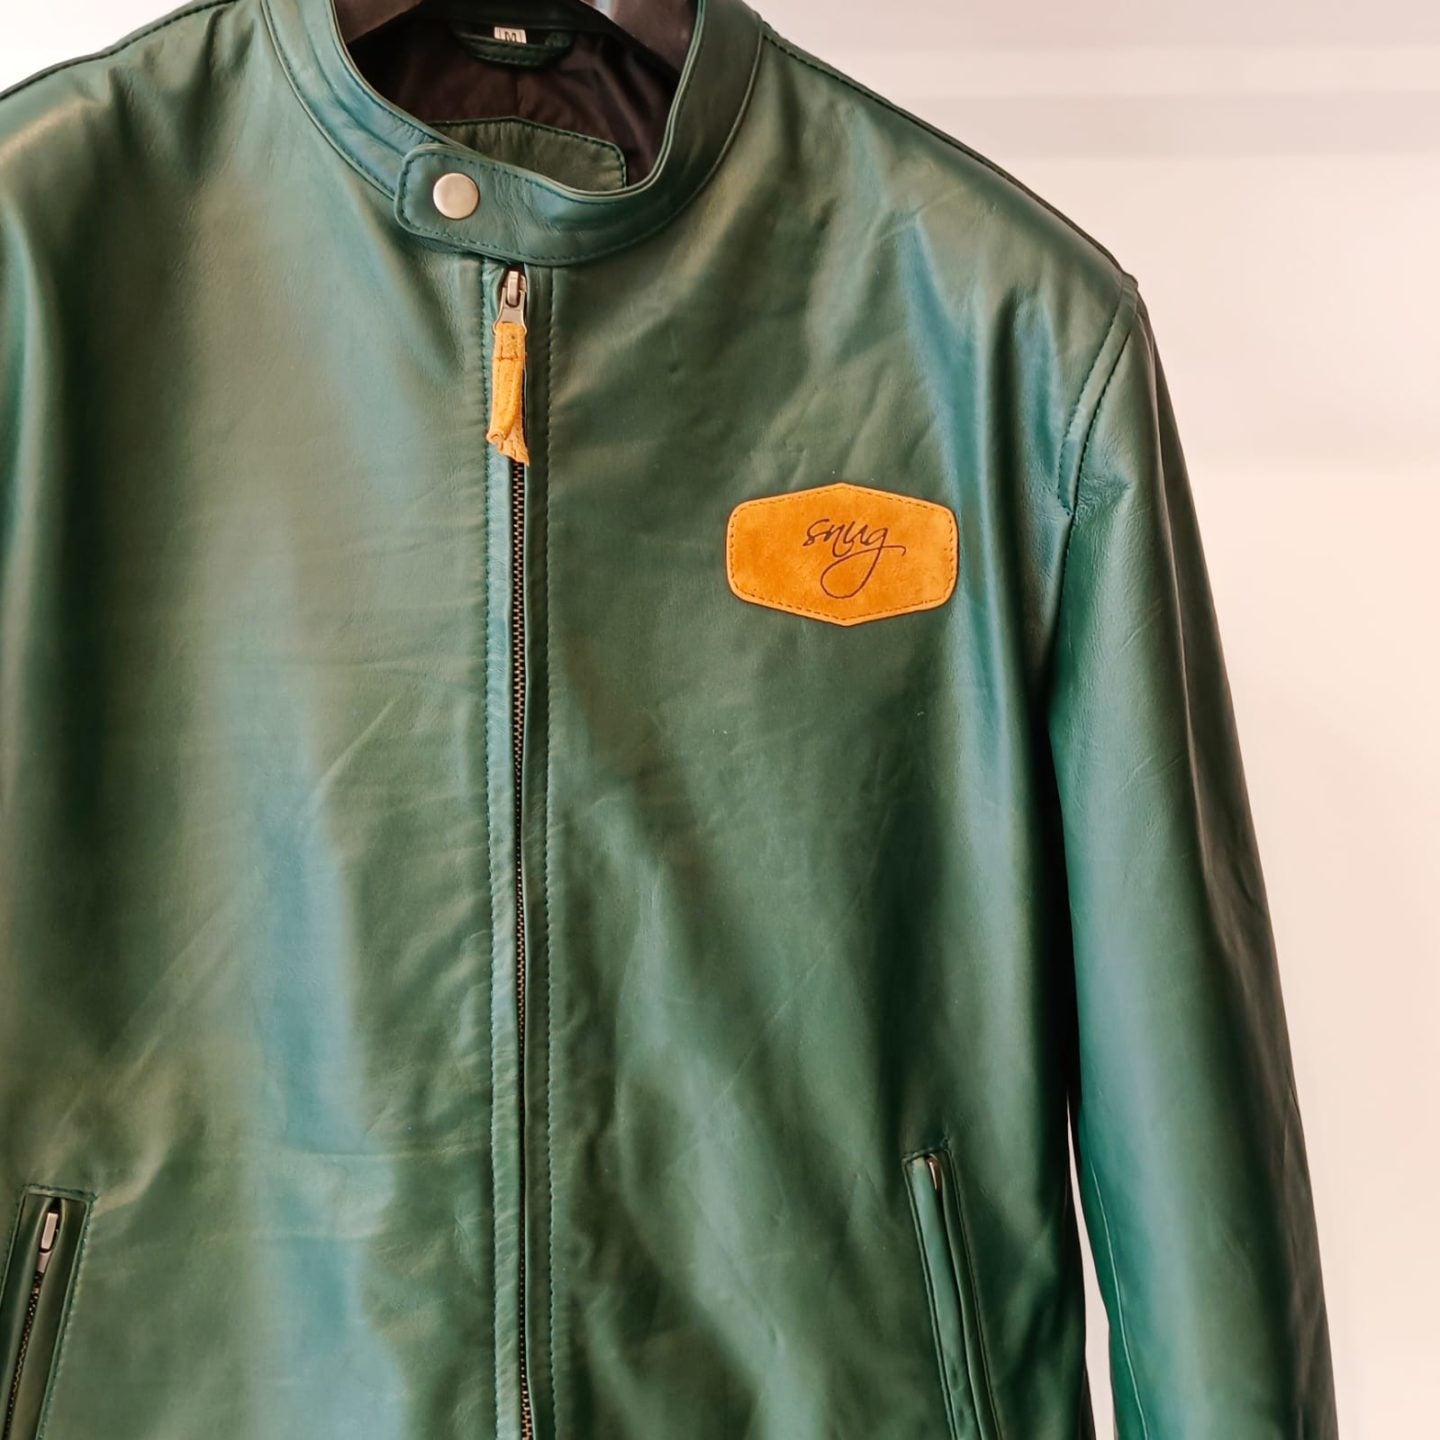 Green Leather Jacket By Snug